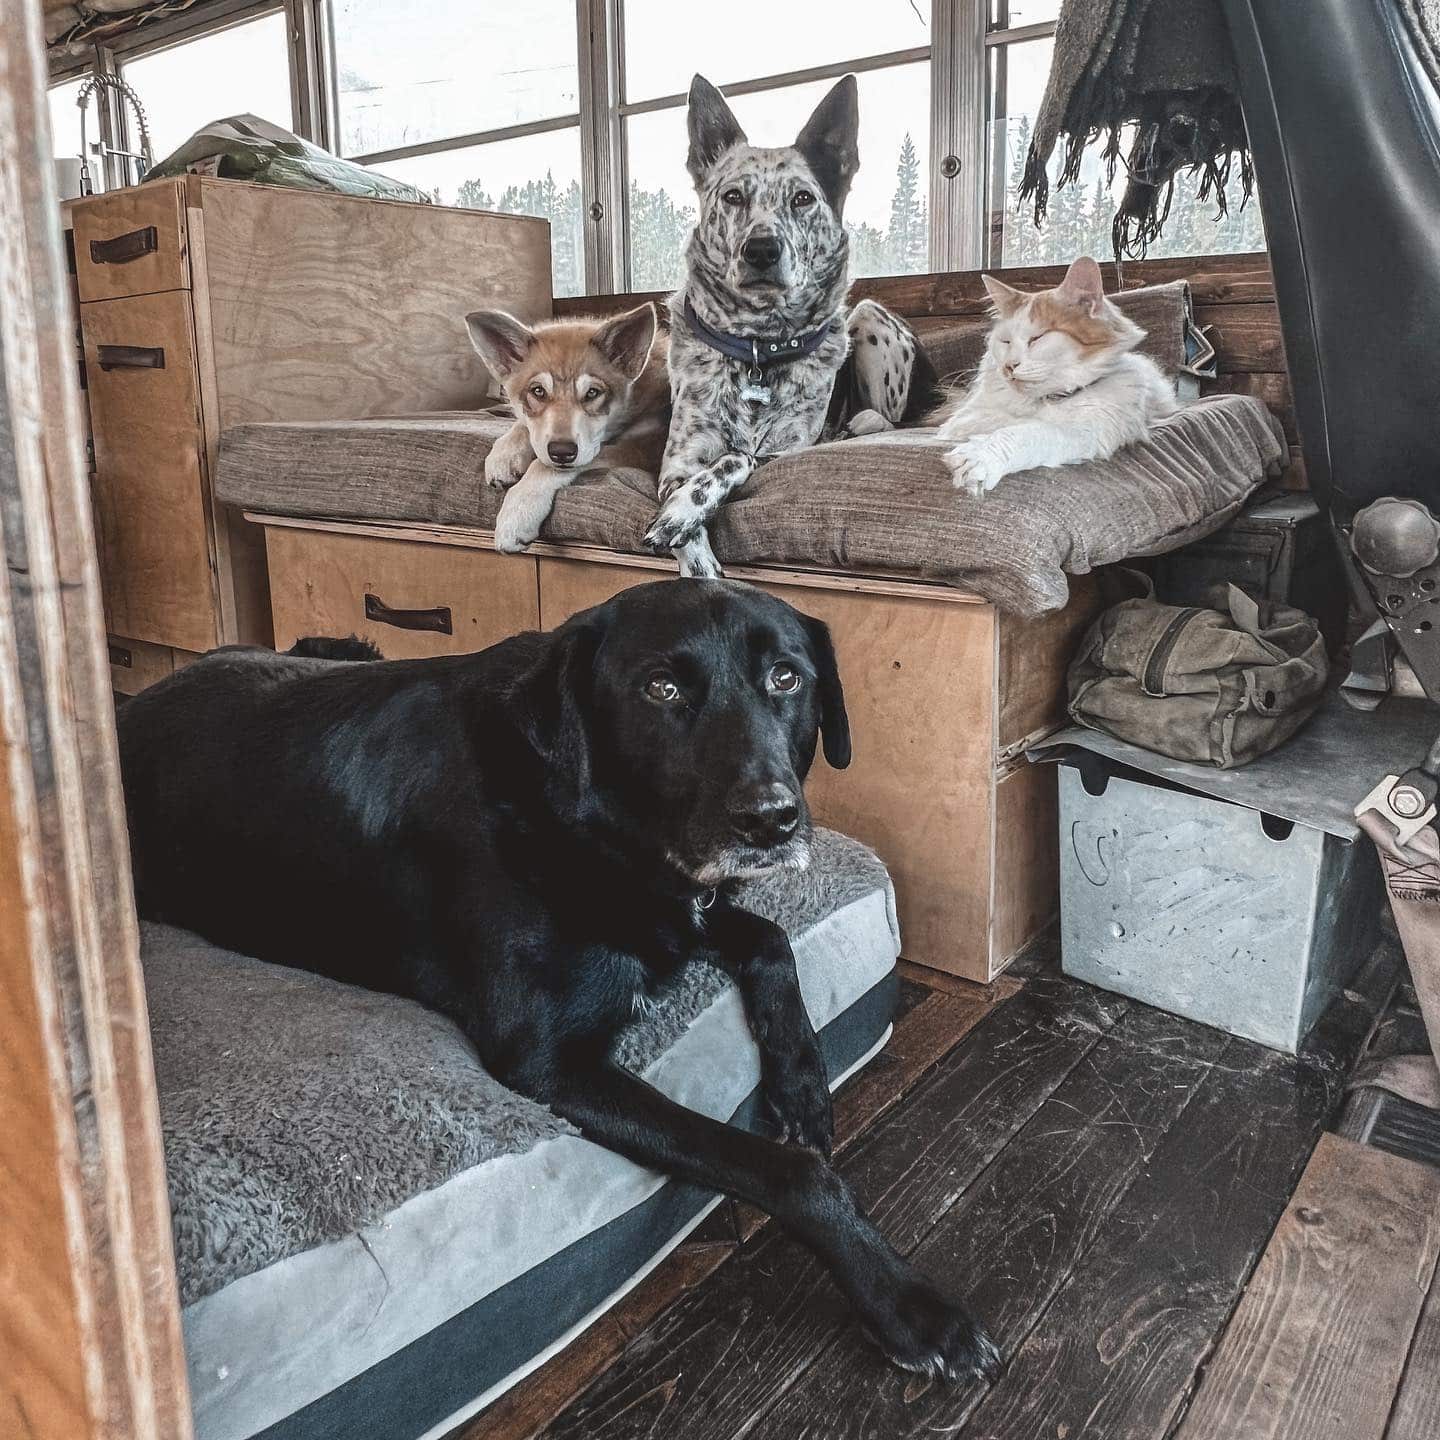 The Painted Buffalo pets lounging inside of their converted skoolie